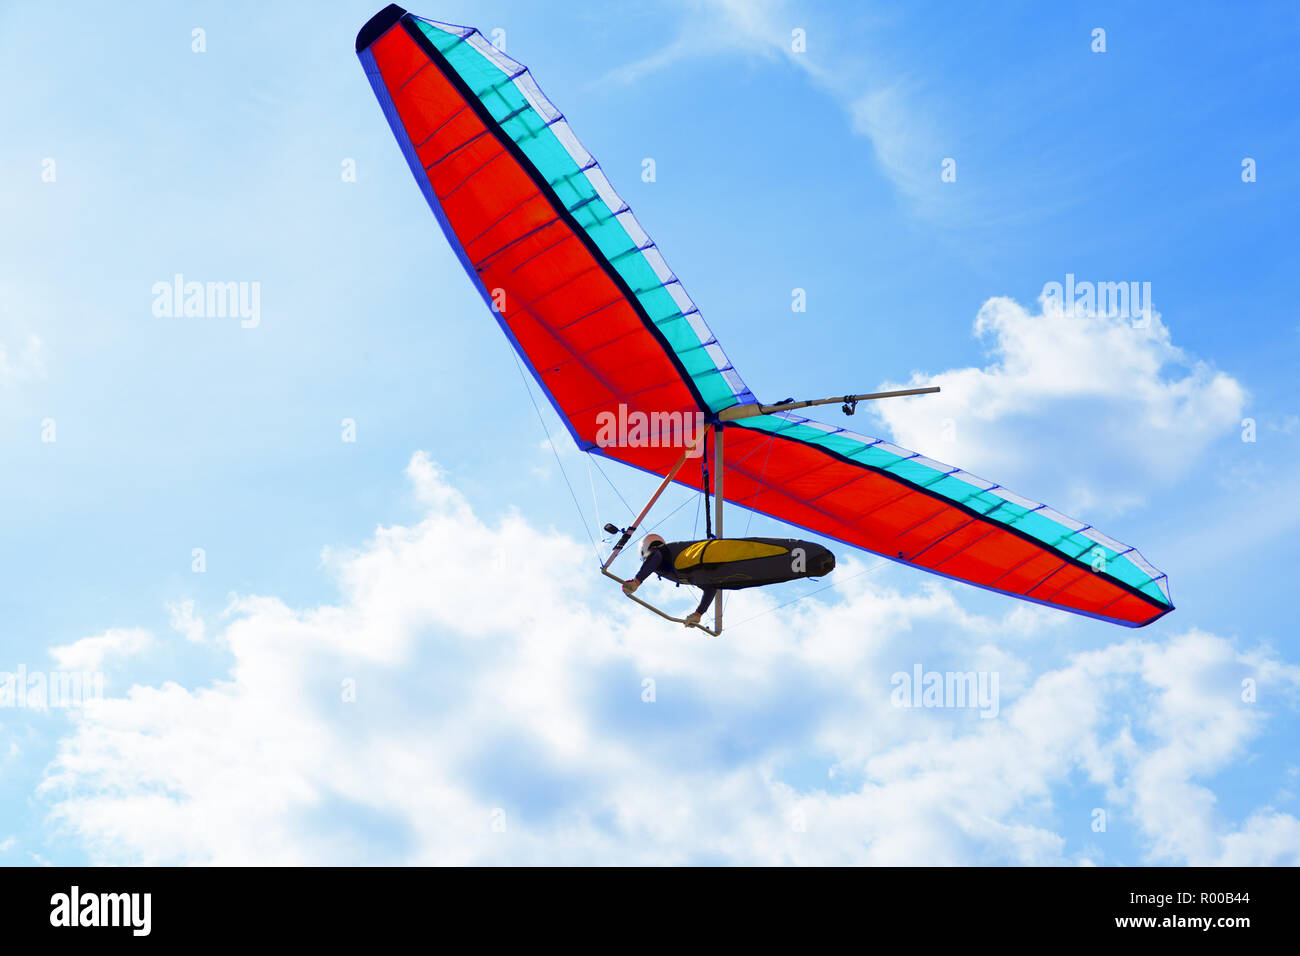 The hang glider on a red hang-glider is flying in a blue sky Stock Photo